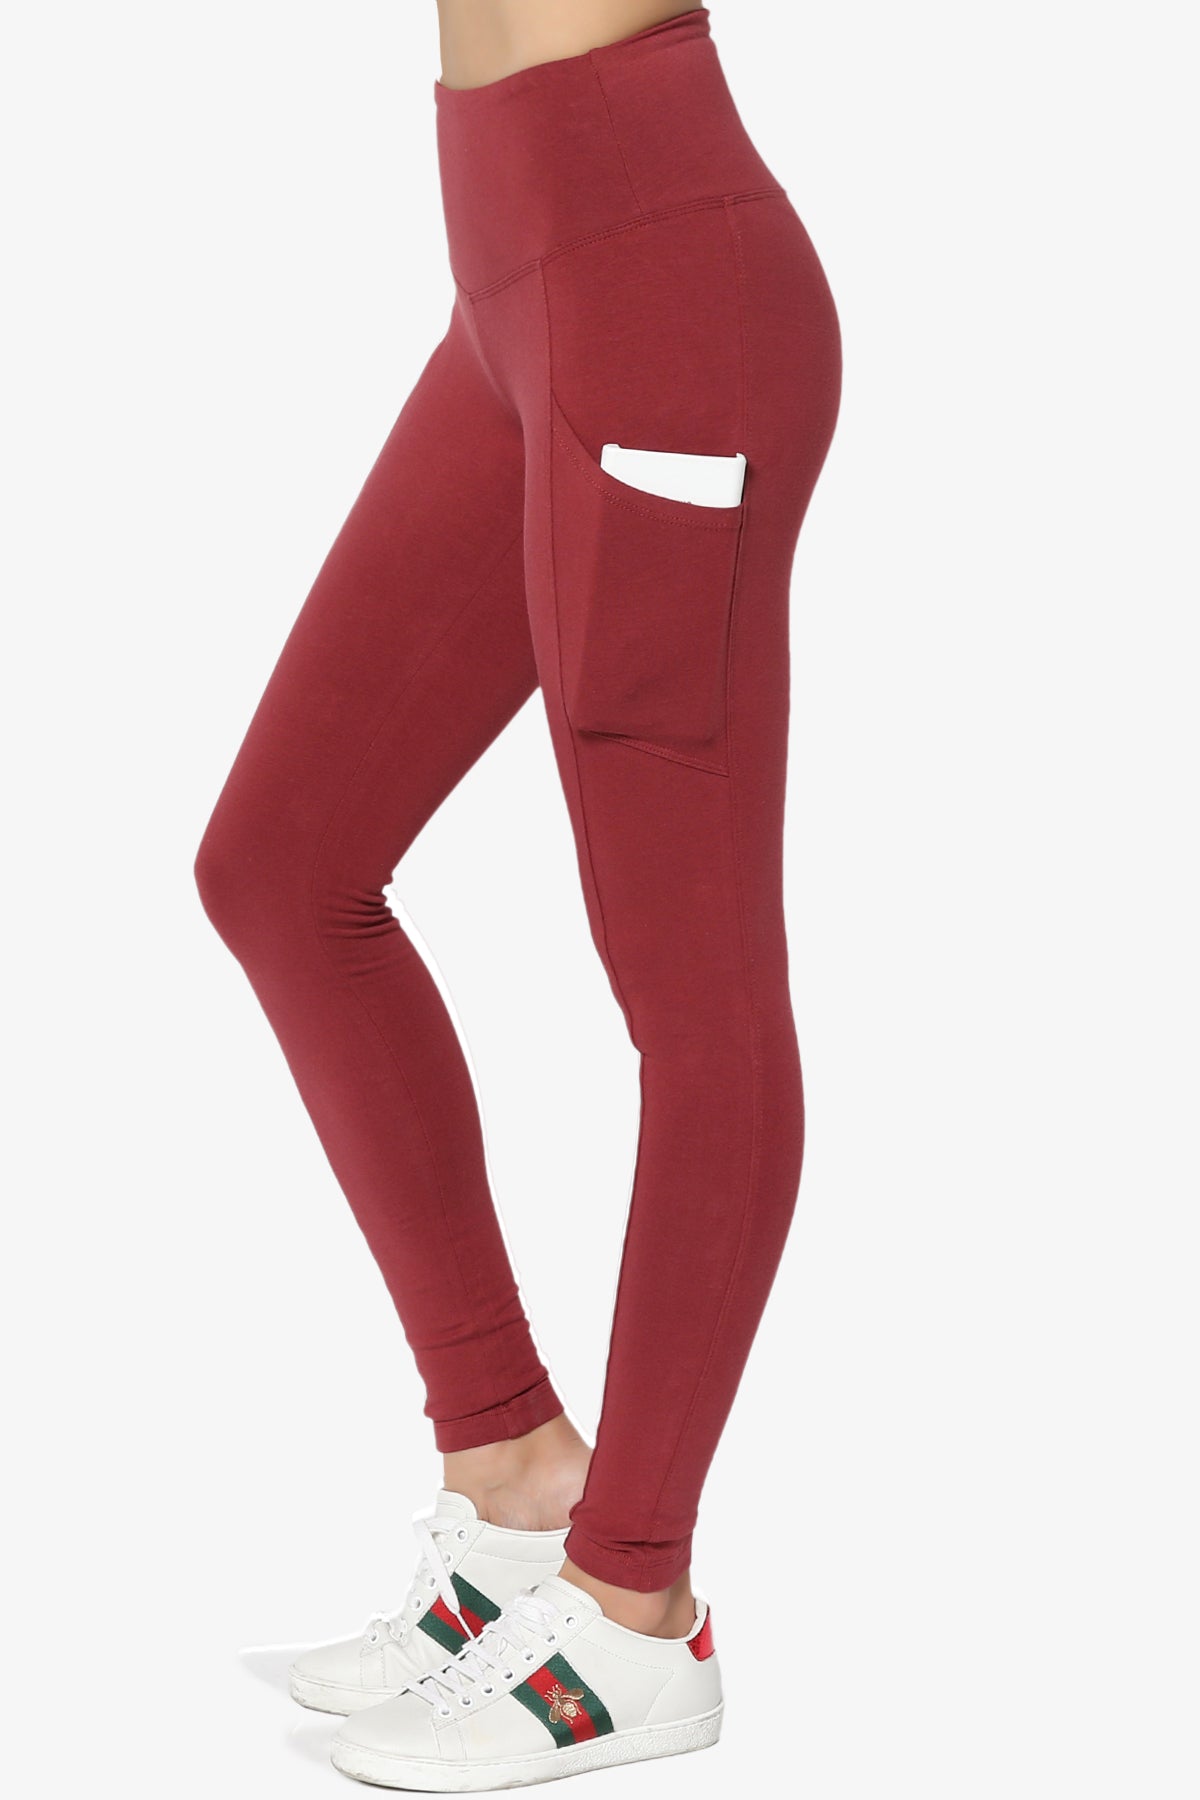 Ansley Luxe Cotton Leggings with Pockets BRICK_1